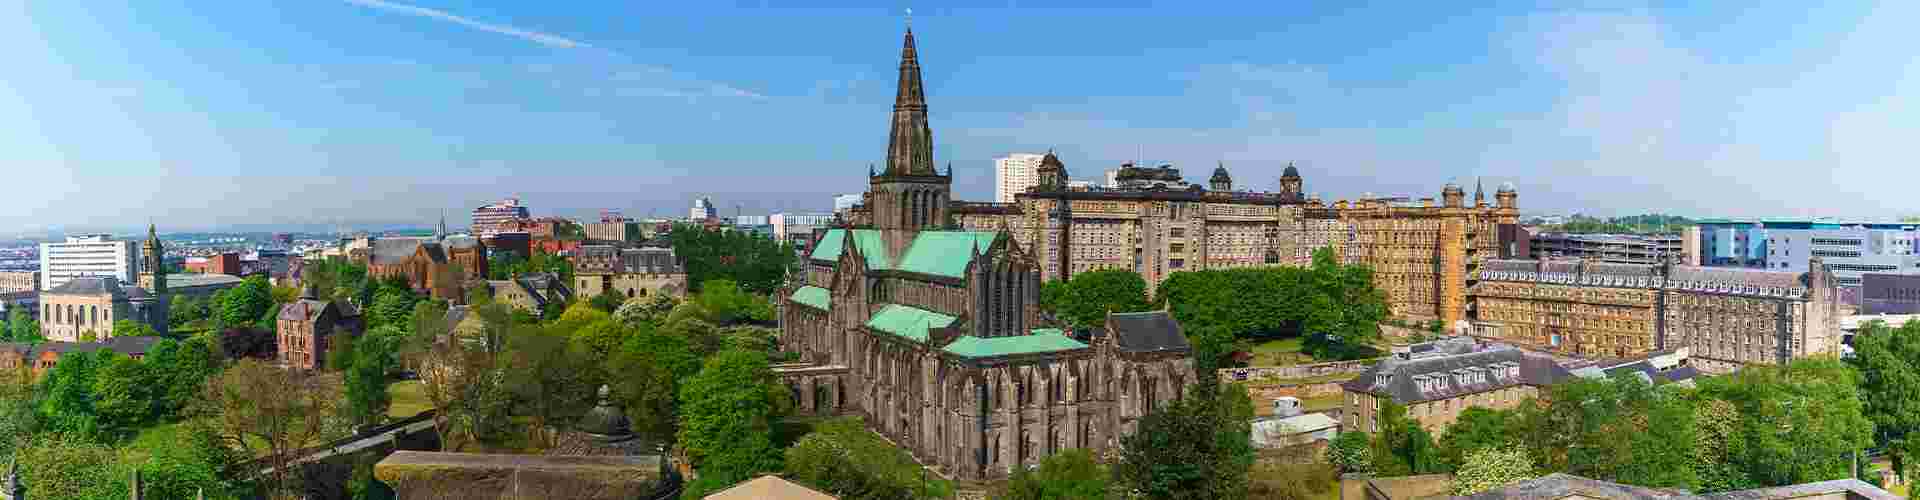 Glasgow's cityscape featuring the Glasgow Cathedral.